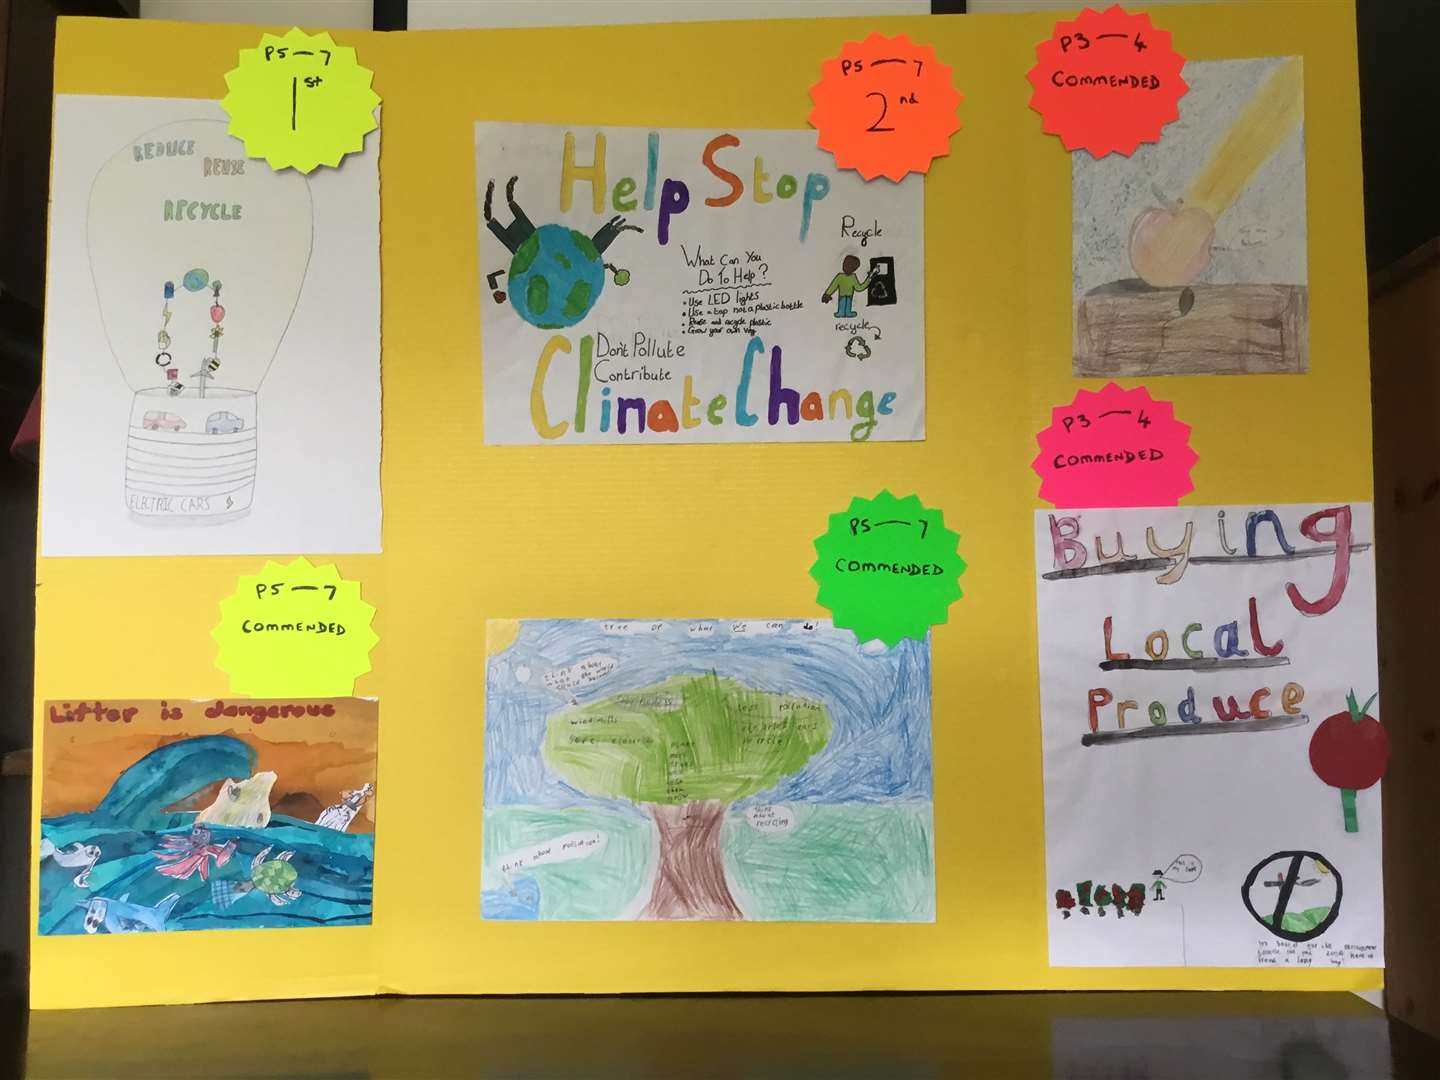 Schools in the Udny area took part in the art competition.